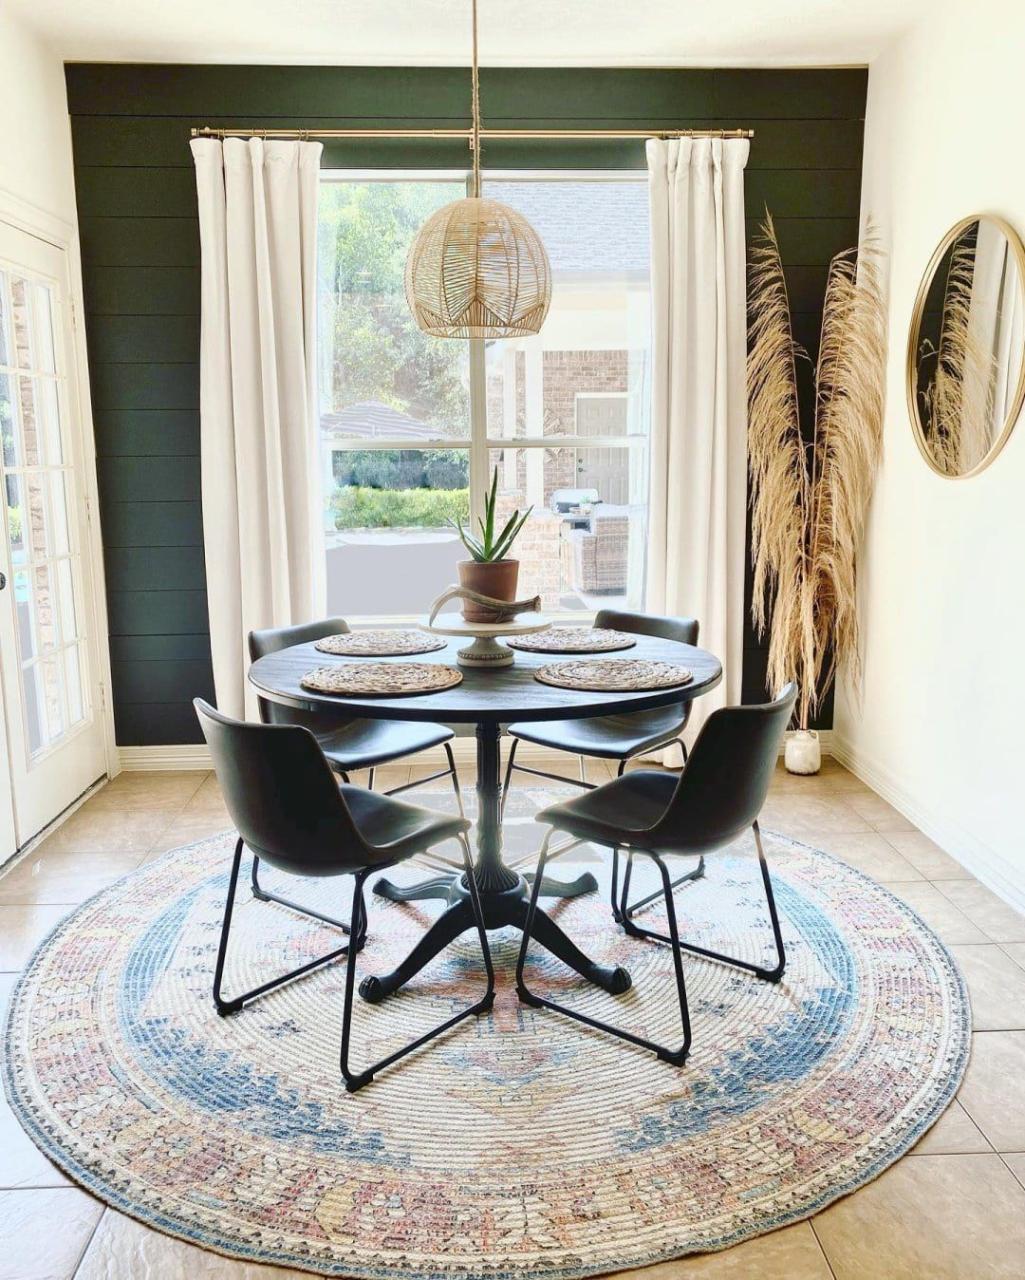 How To Decorate A Round Dining Table - 10 Ideas | Dining Room Design Round  Table, Round Dining Room Table, Glass Round Dining Table